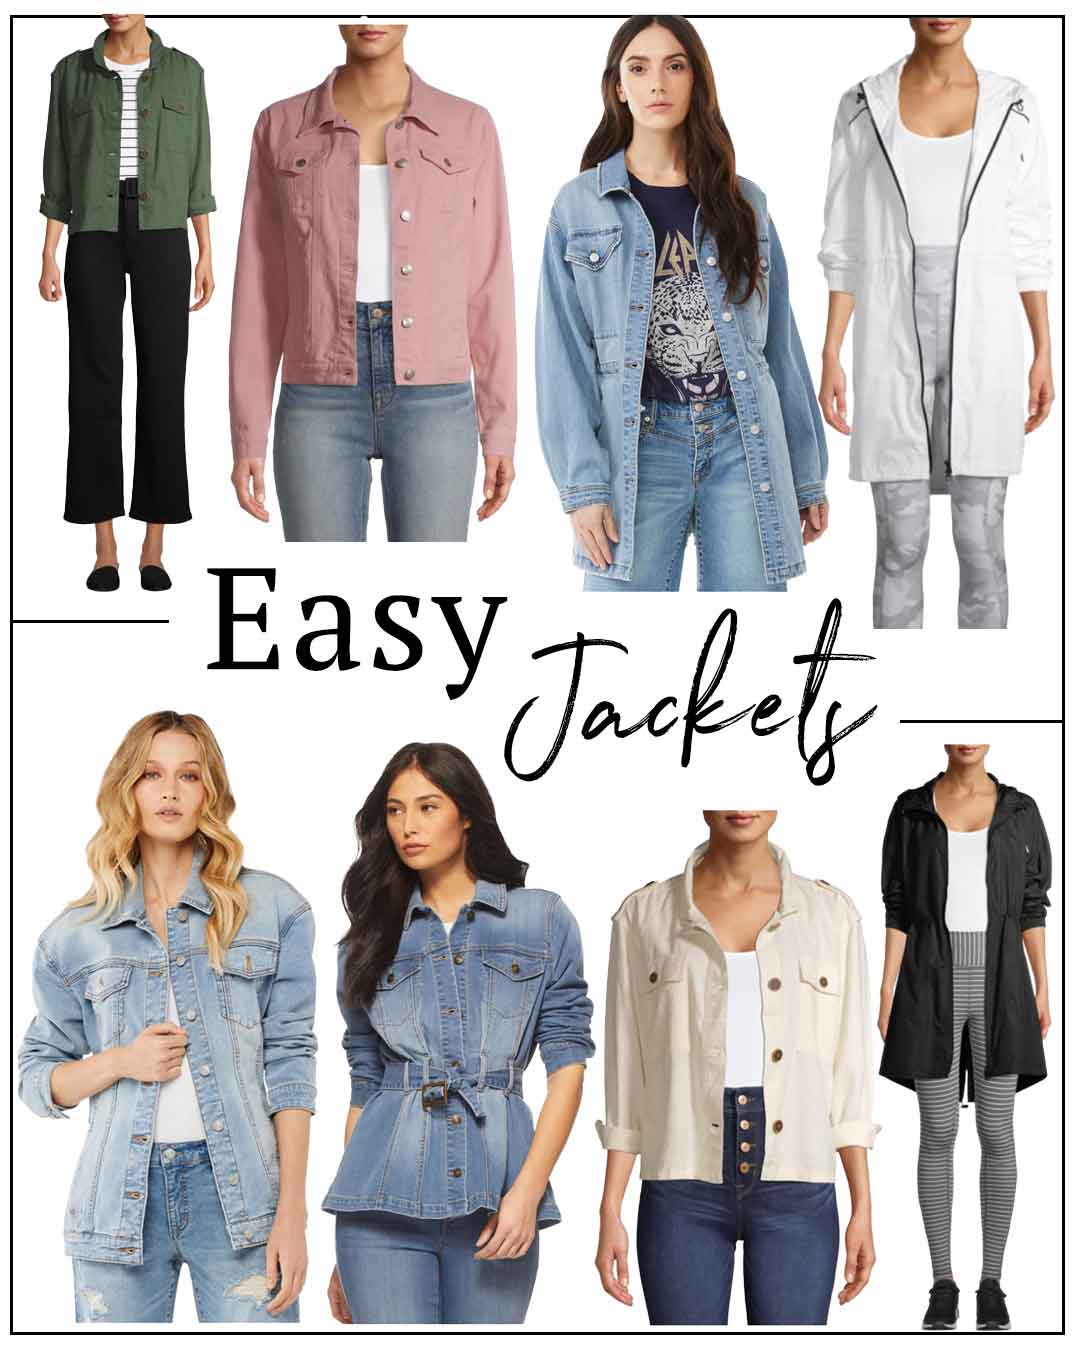 Easy Jackets | Spring Fashion Trends at Walmart